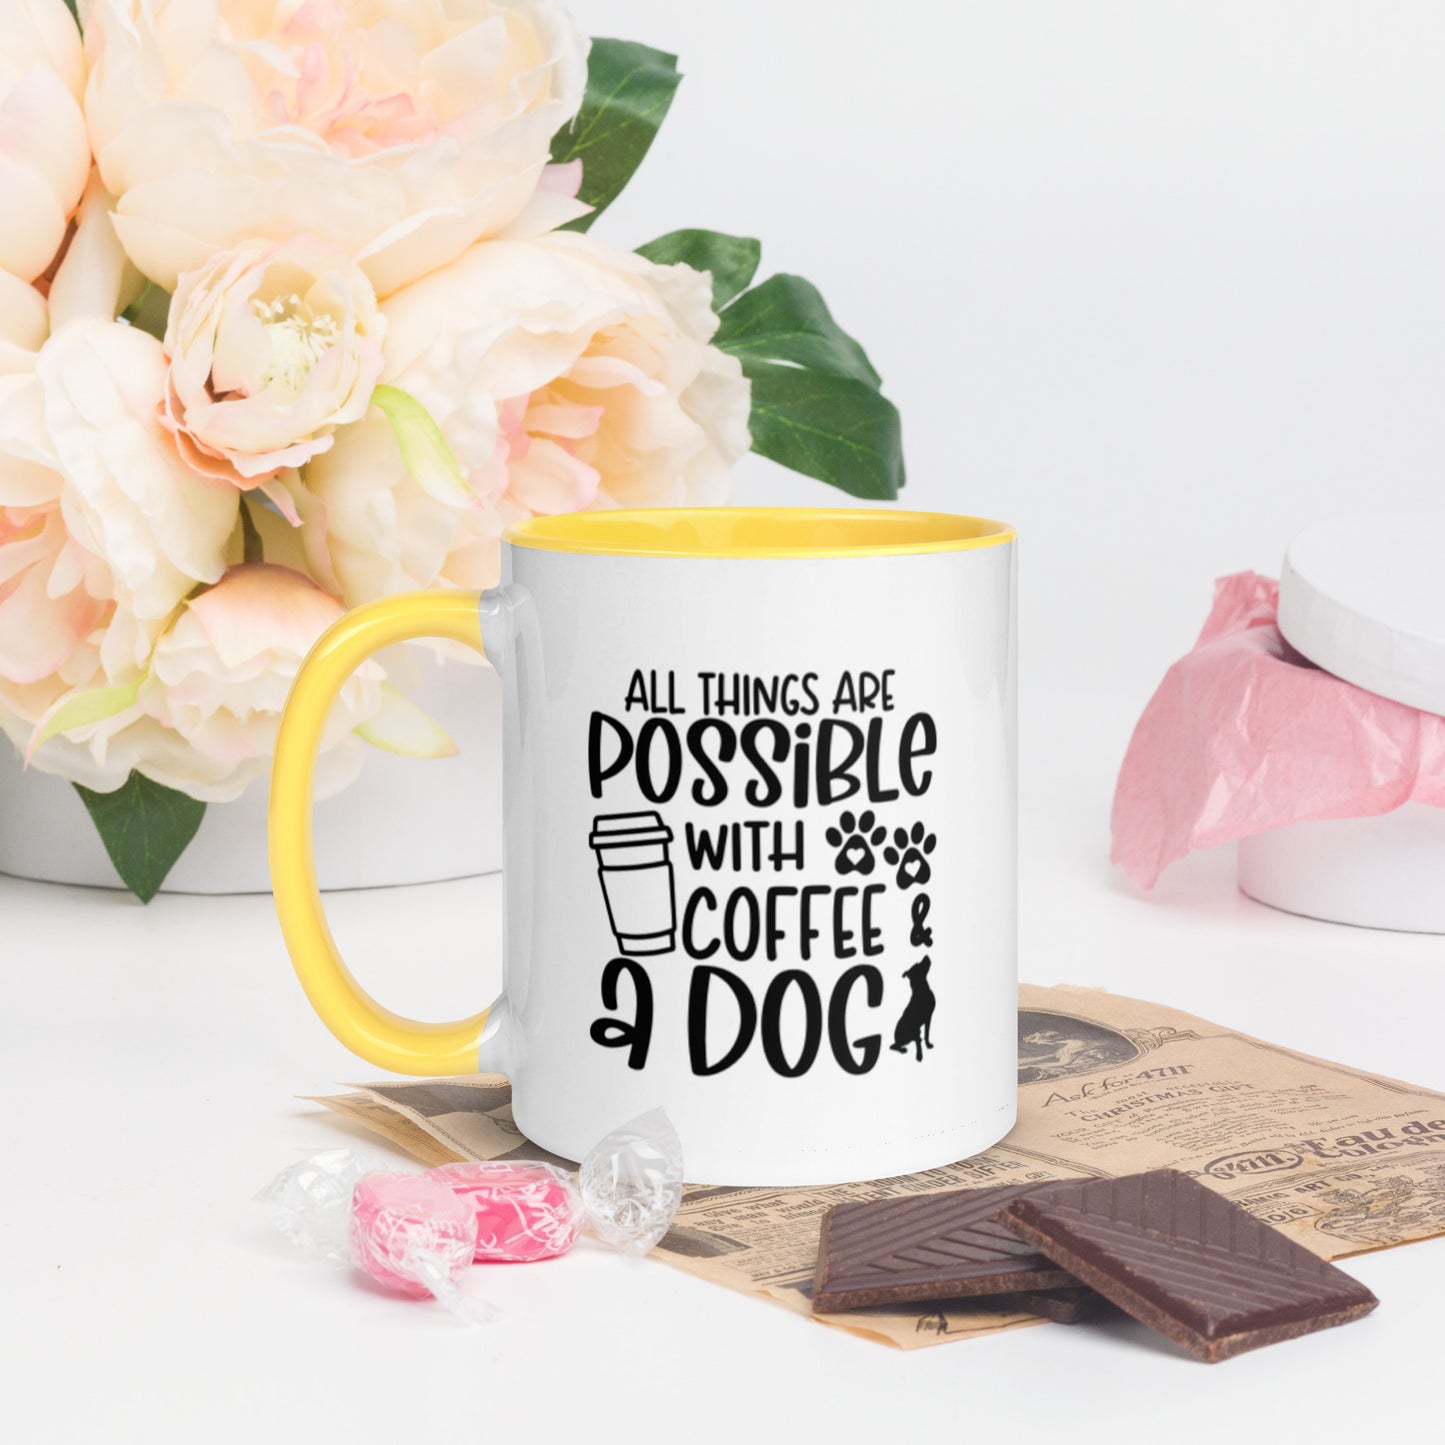 All is Possible with Coffee and a dog